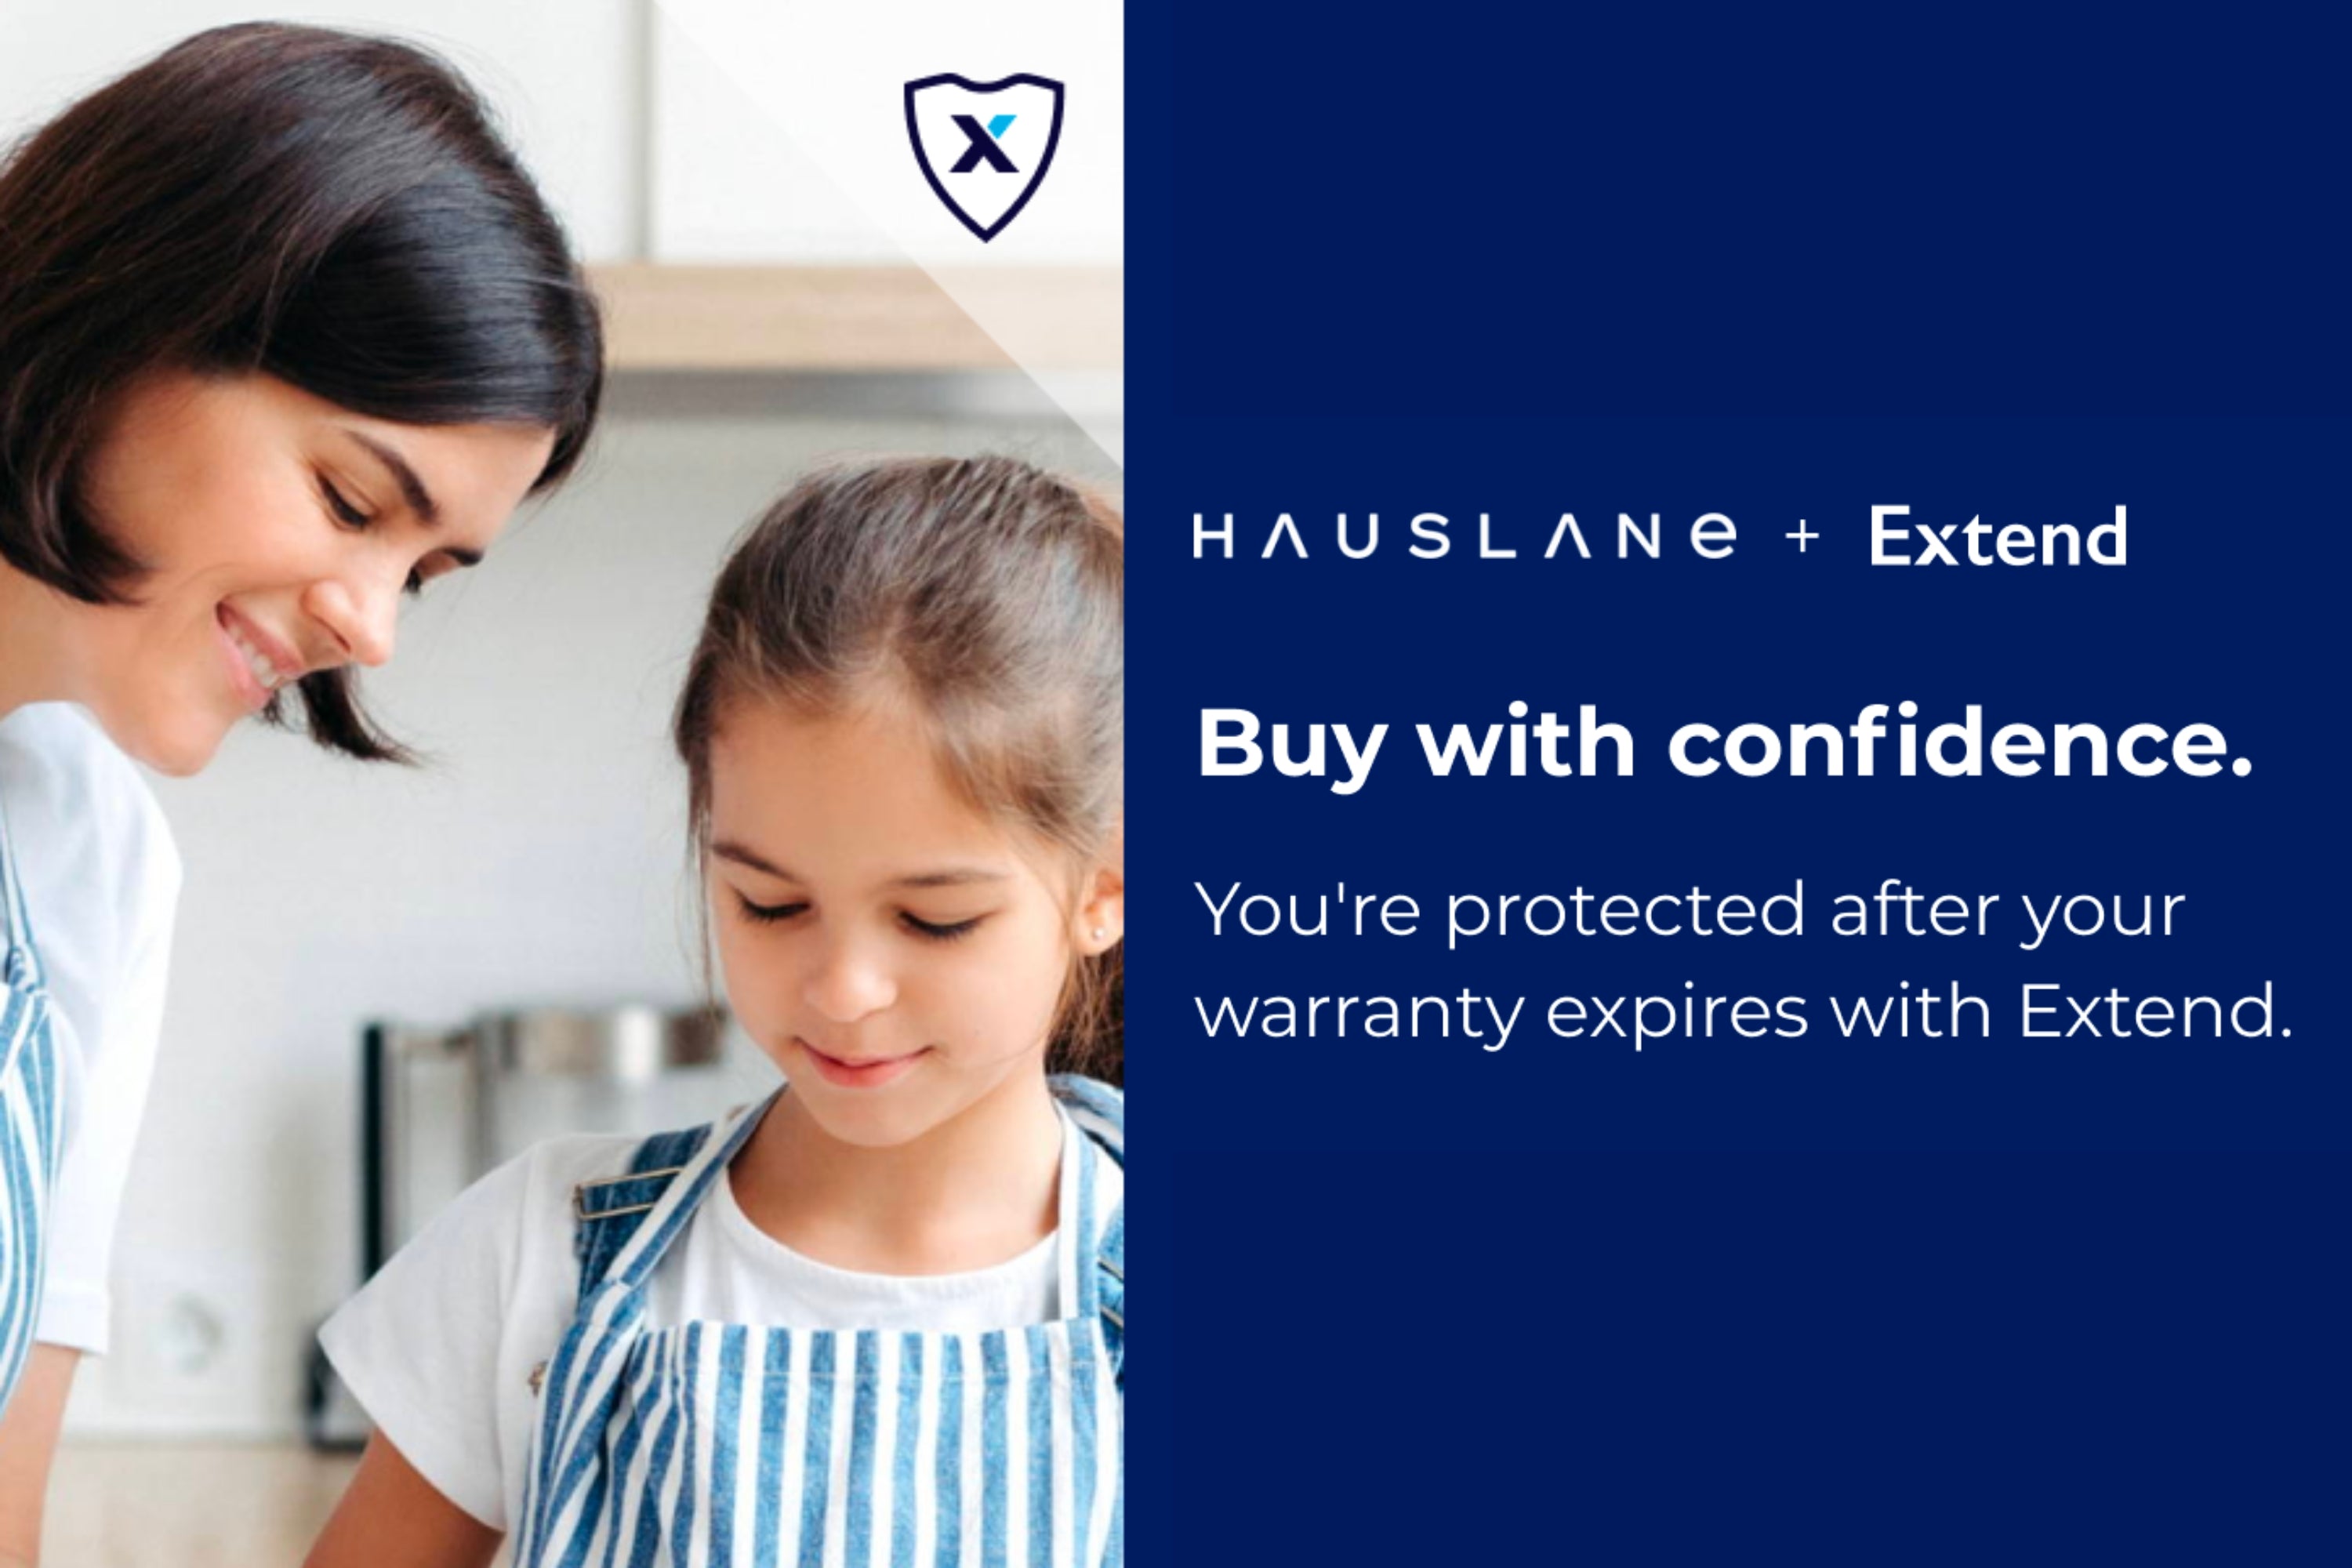 Hauslane x Extend Product Protection Plan